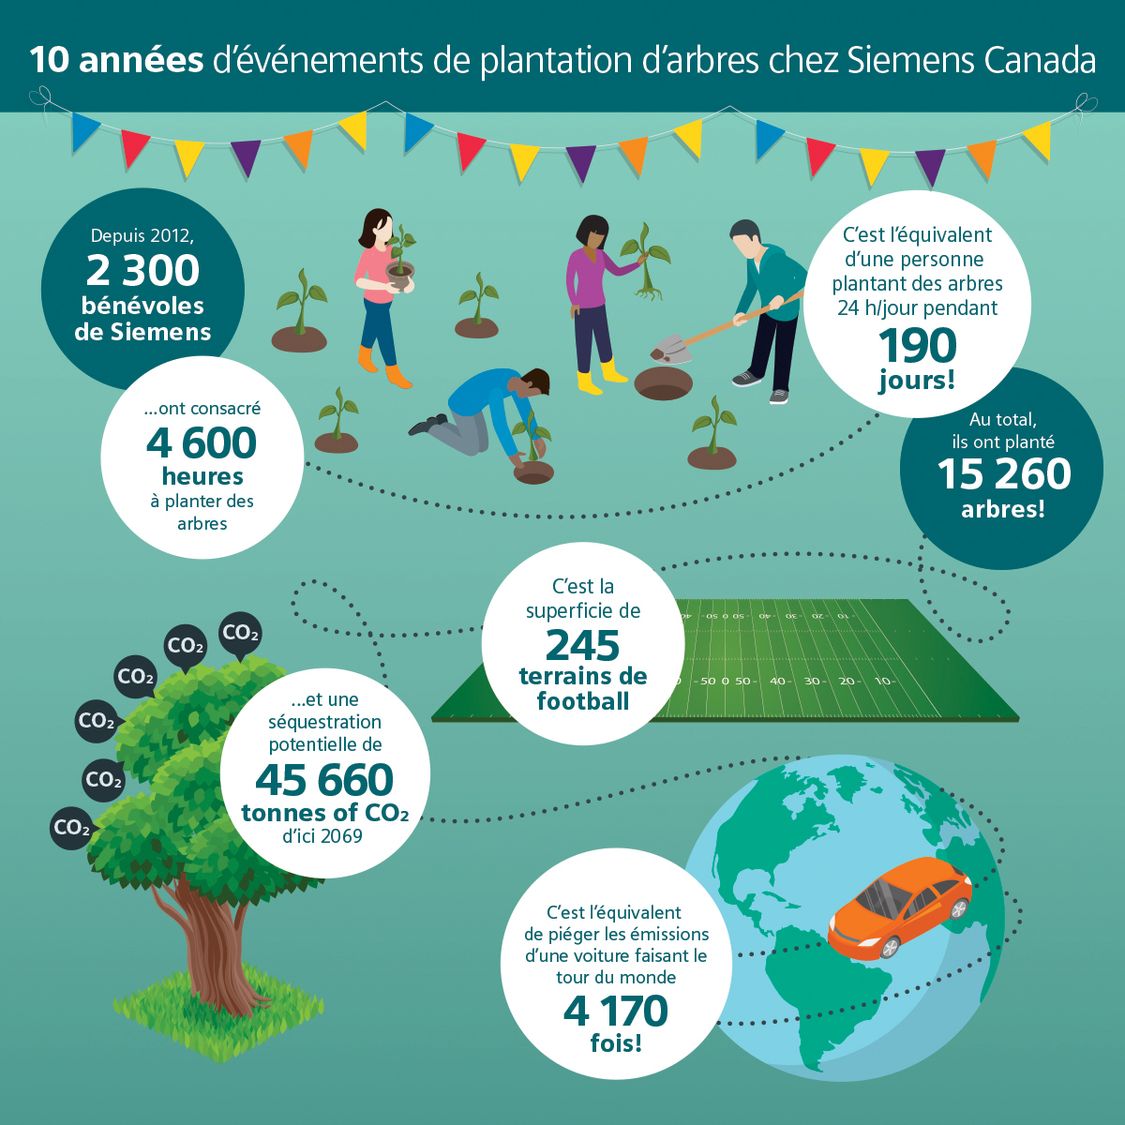 Tree planting at Siemens Canada infographic